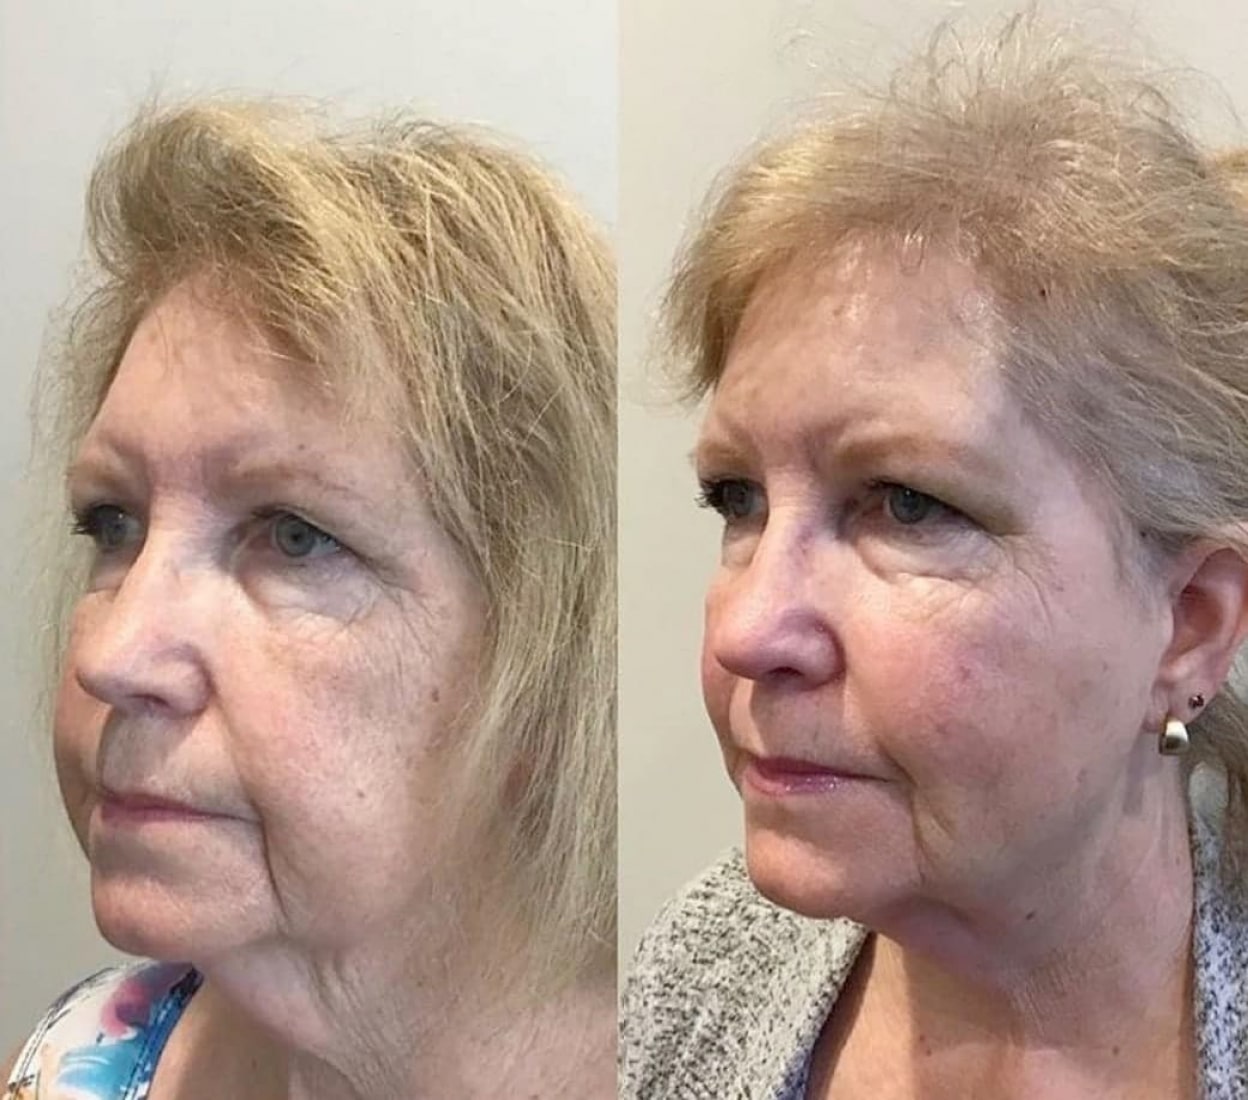 We can't stop the aging process but Dr. Jennifer Armstrong can perform wrinkle correction procedures that reduce the signs of aging.